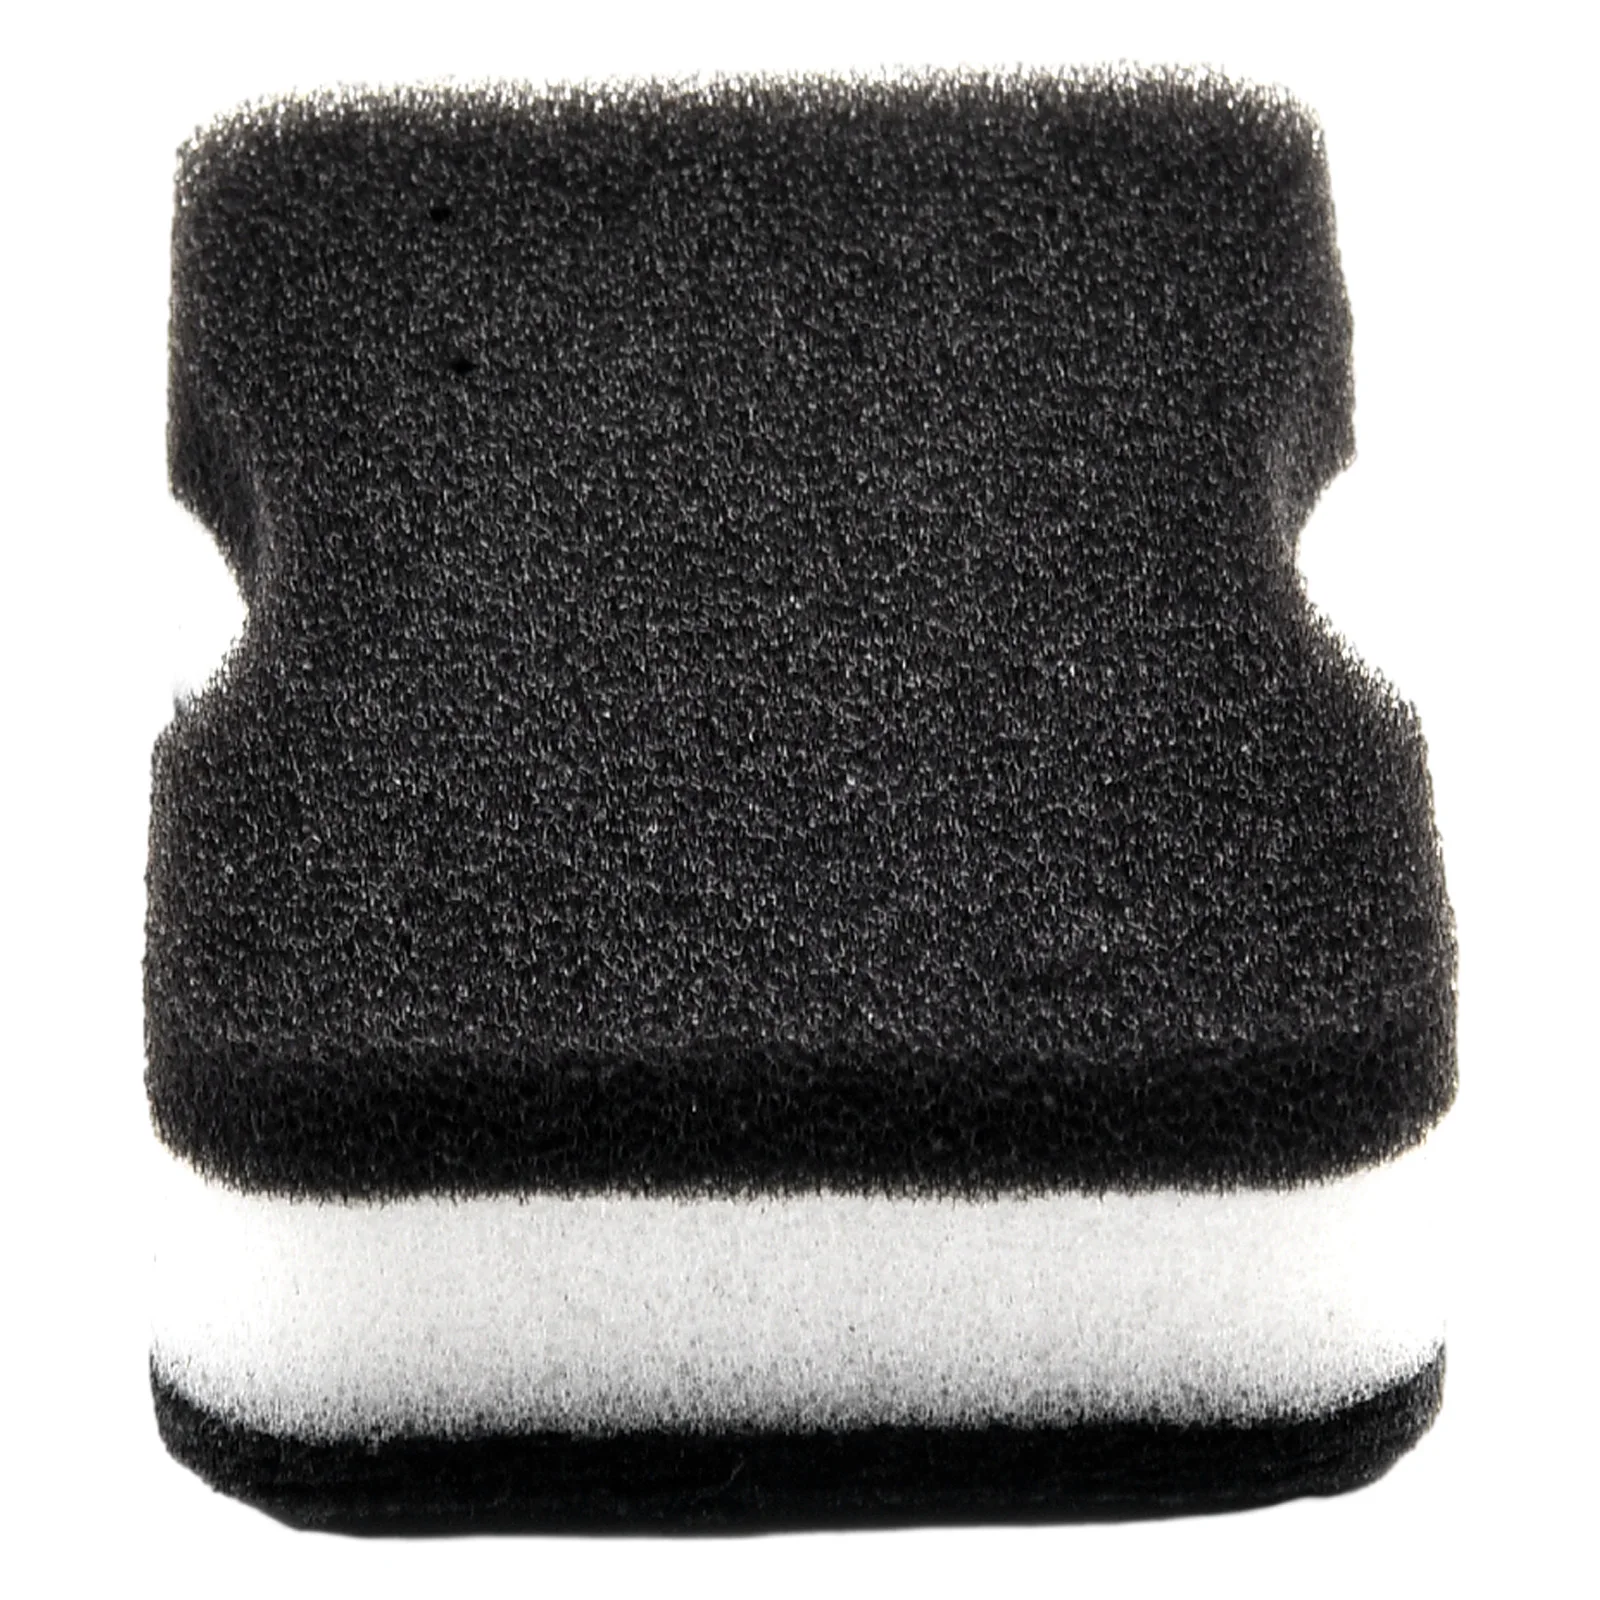 Black Sponges & Scouring Pads at